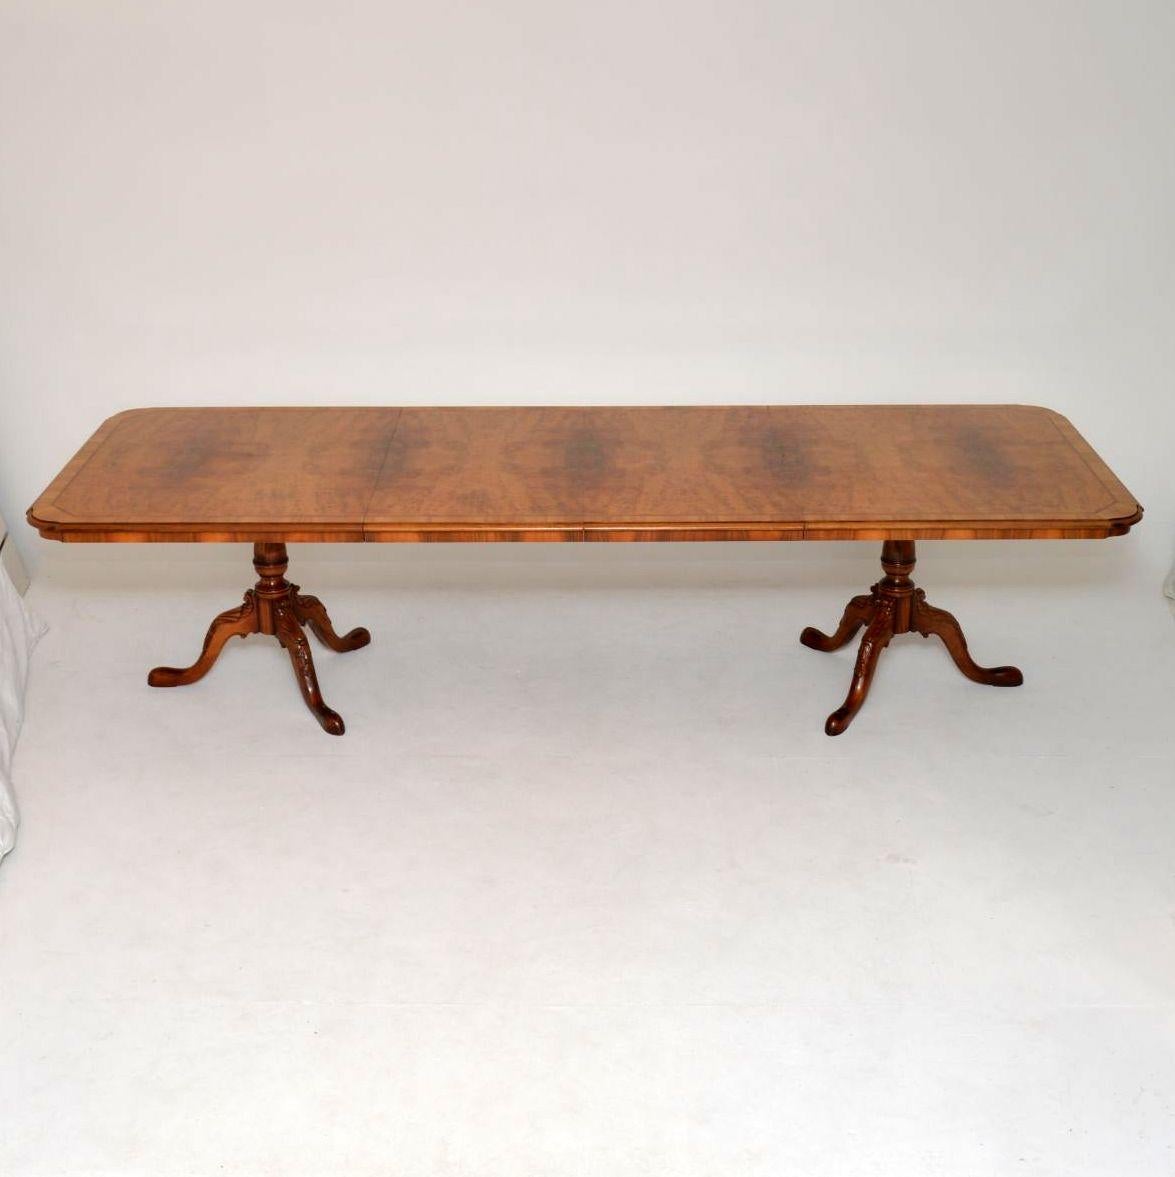 Magnificent large dining table and matching chairs in walnut and burr walnut, with an extendable table that can comfortably seat ten people. The chairs have very wide proportions & are carved on the backs, plus on the tops of the legs too. The